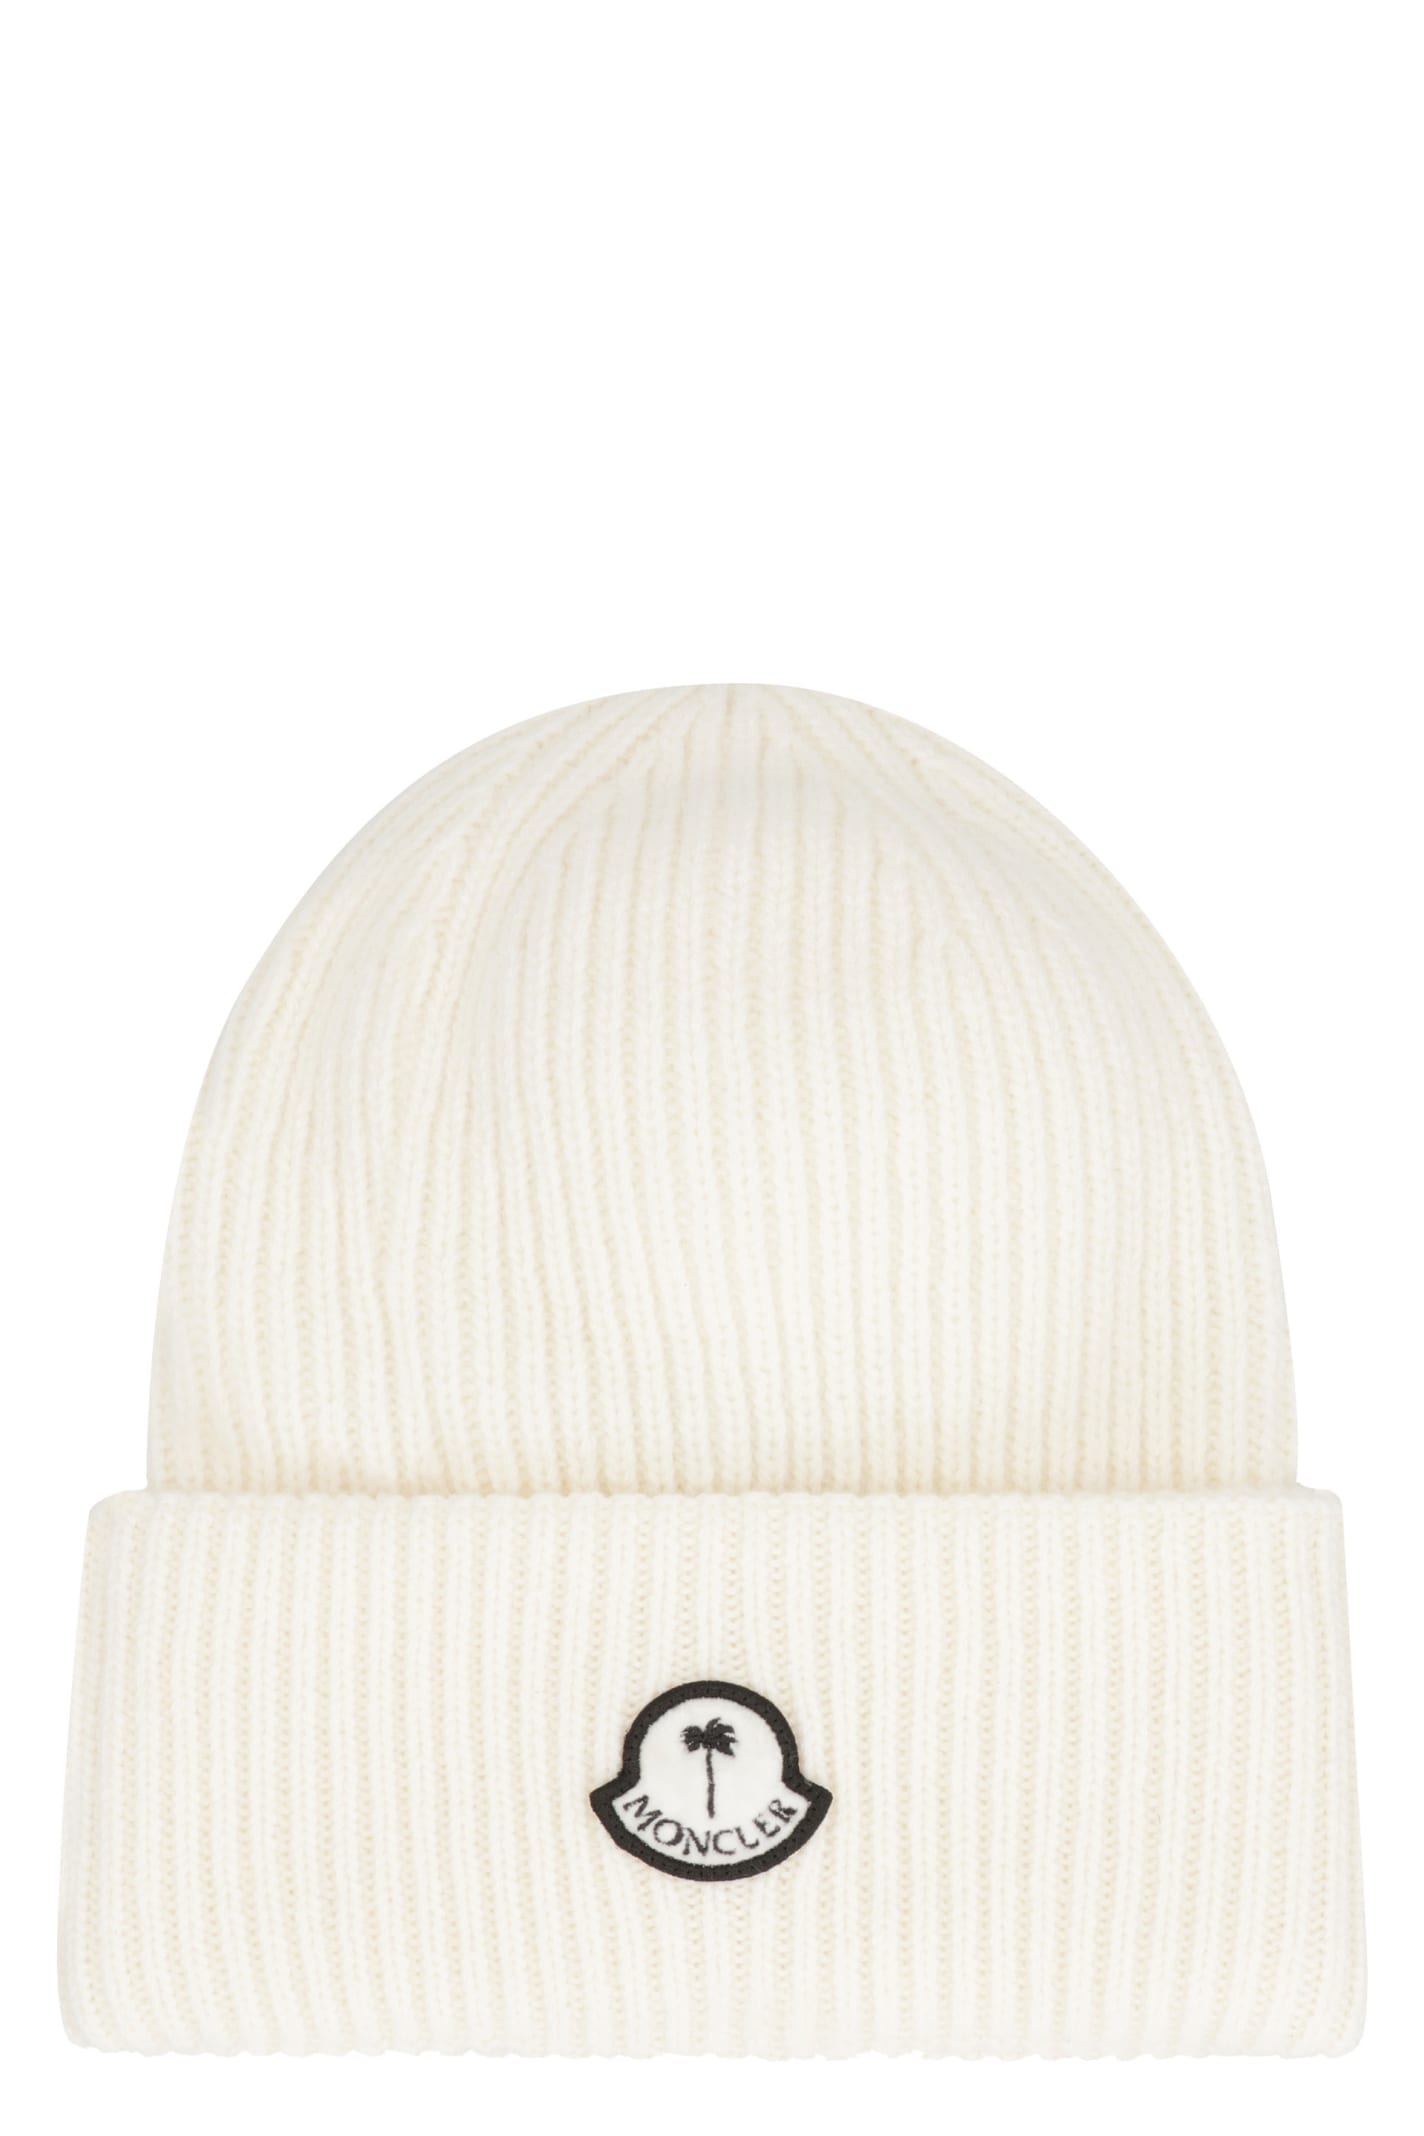 8 Moncler Palm Angels - Cable Knit Beanie